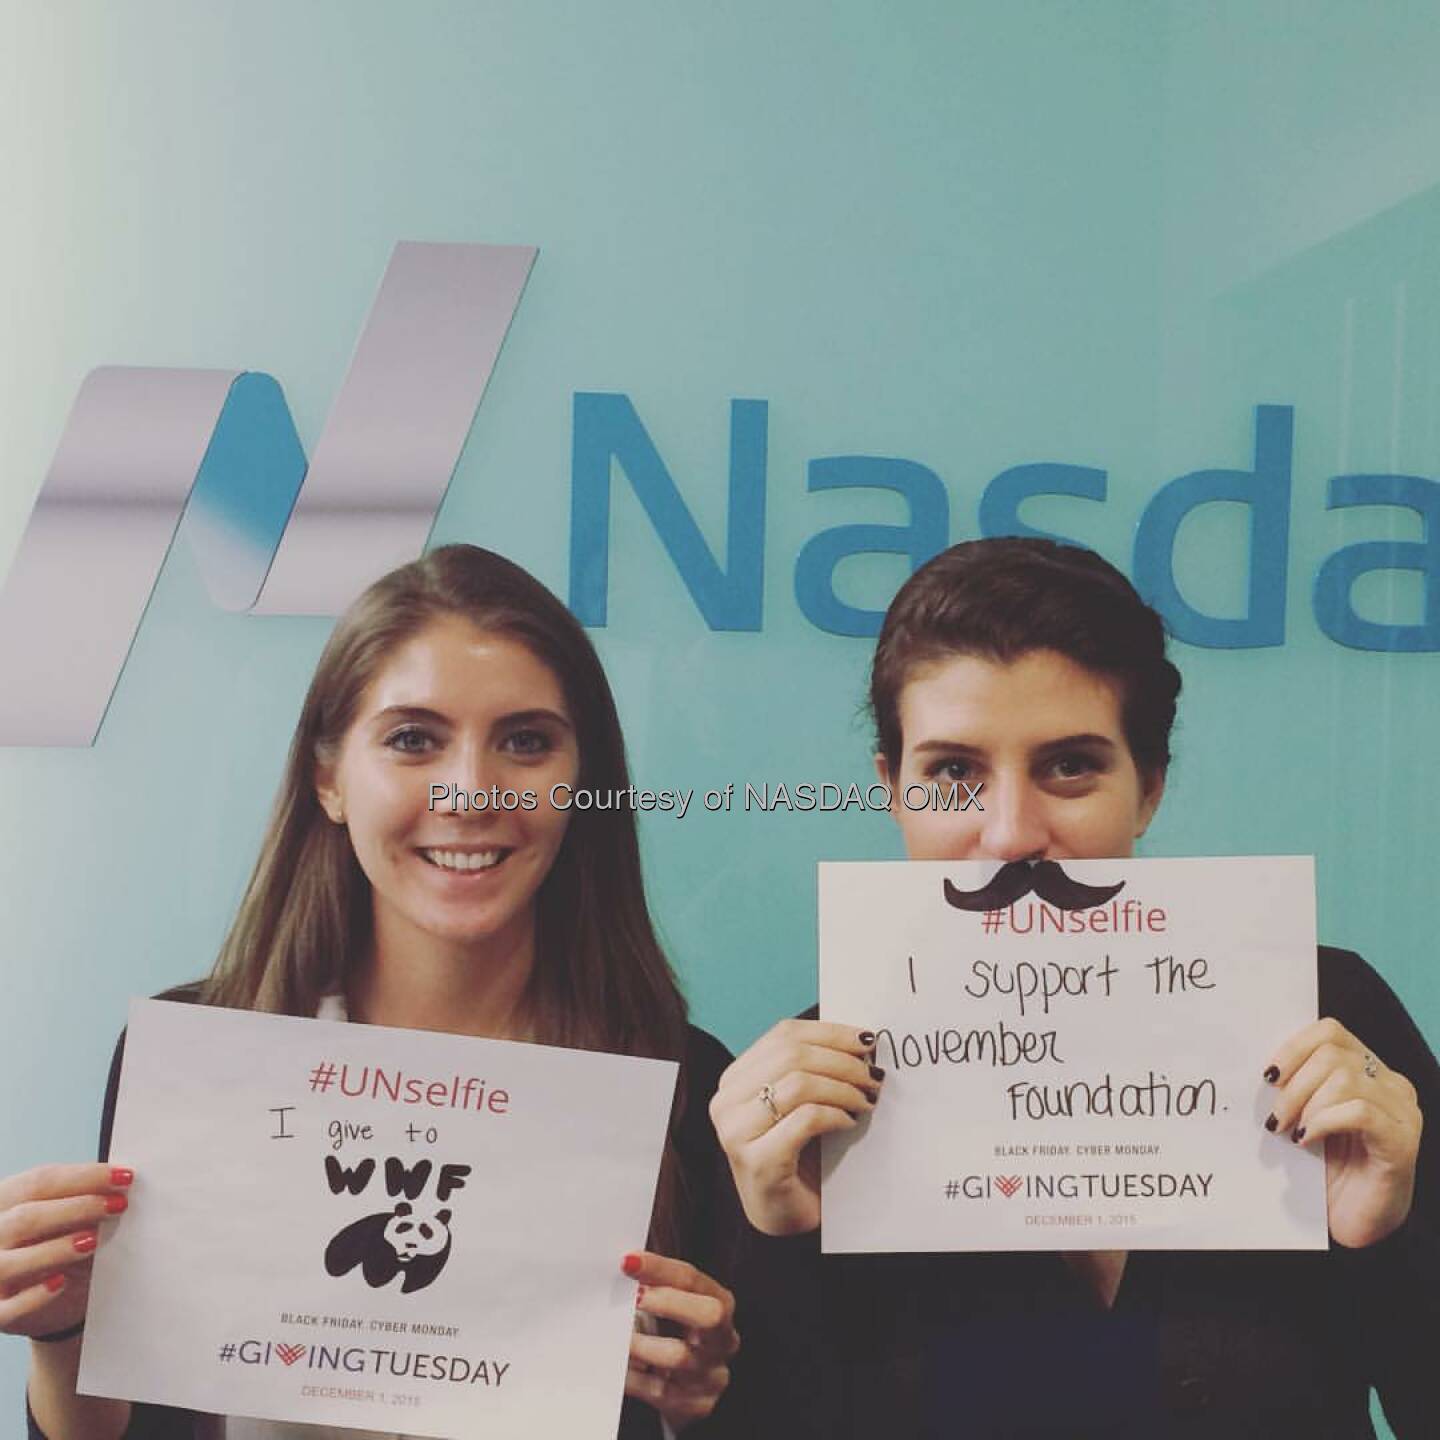 Nasdaq's Kristan Scala supports @wwf and Kelsey Speal supports @movember #marketerswhocare #GivingTuesday #UNselfie   Source: http://facebook.com/NASDAQ